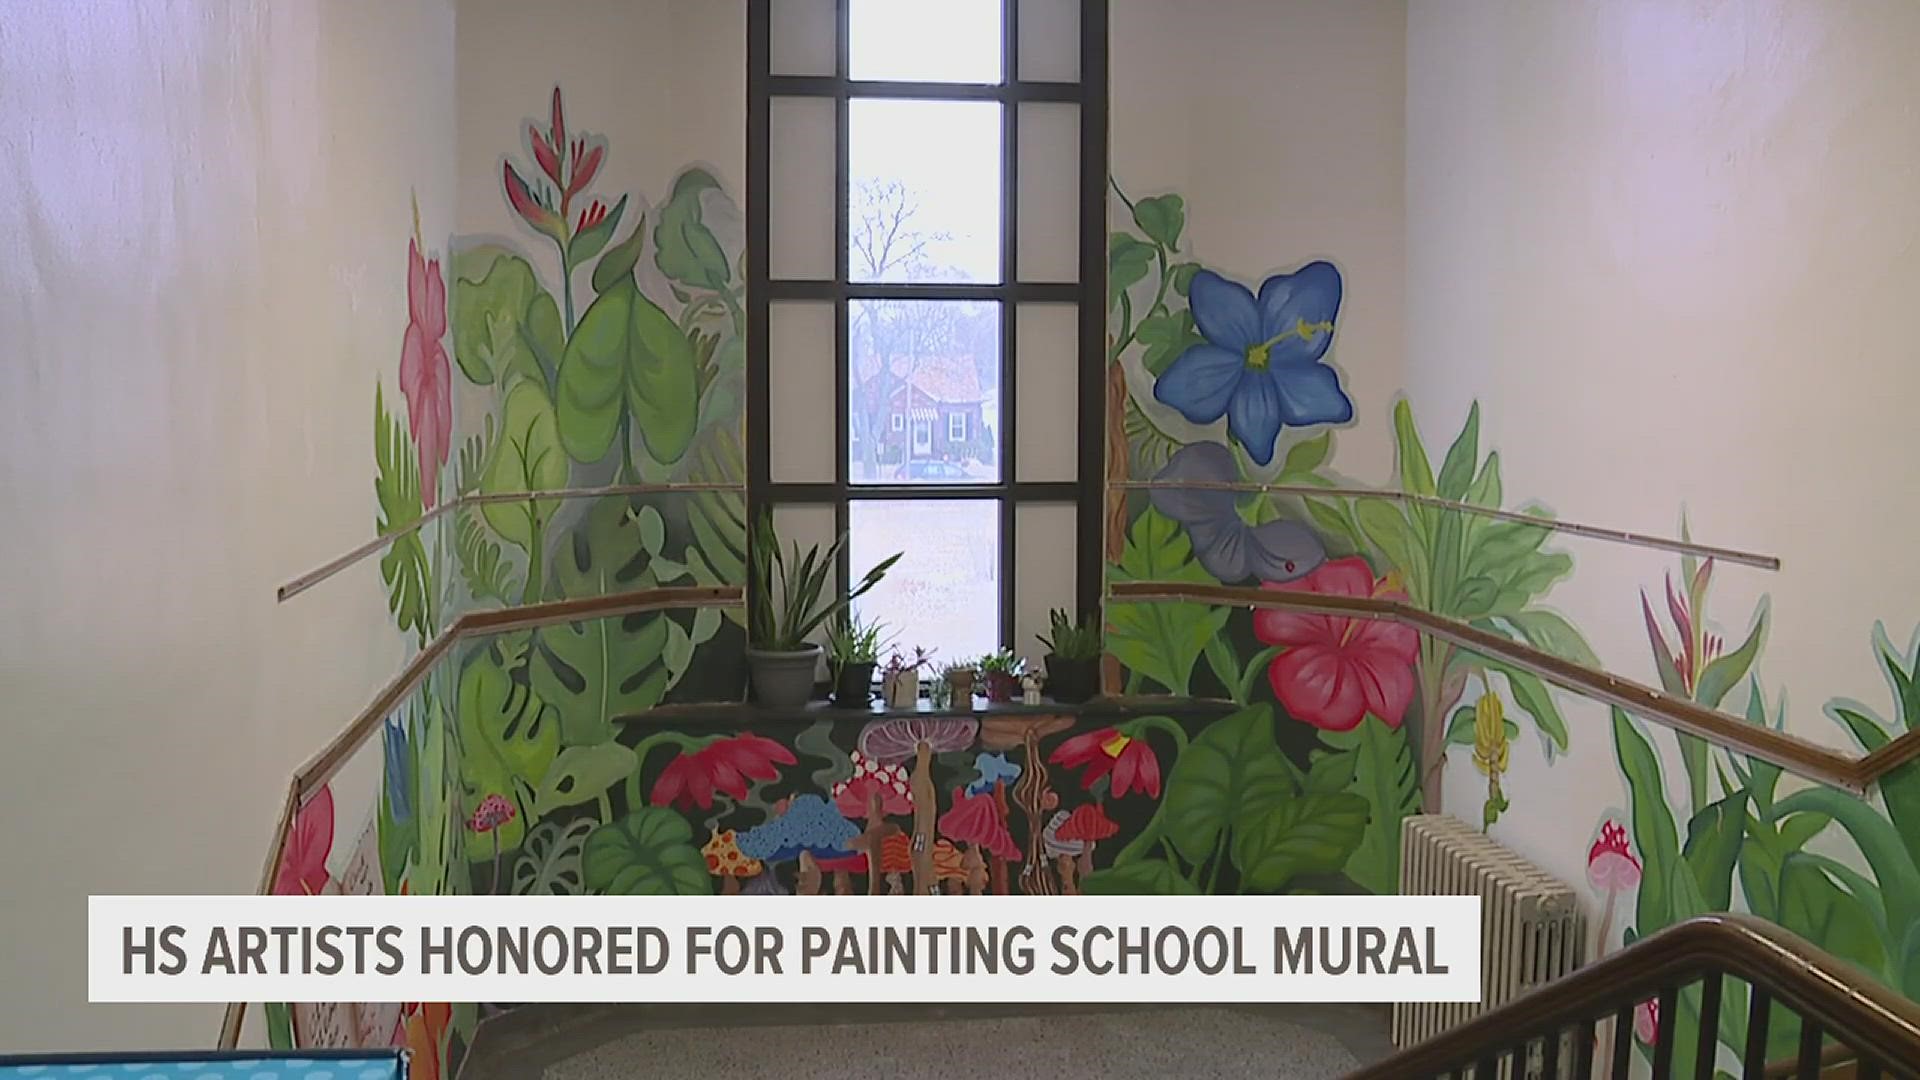 The students said they hope their work inspires other kids to pursue the arts.